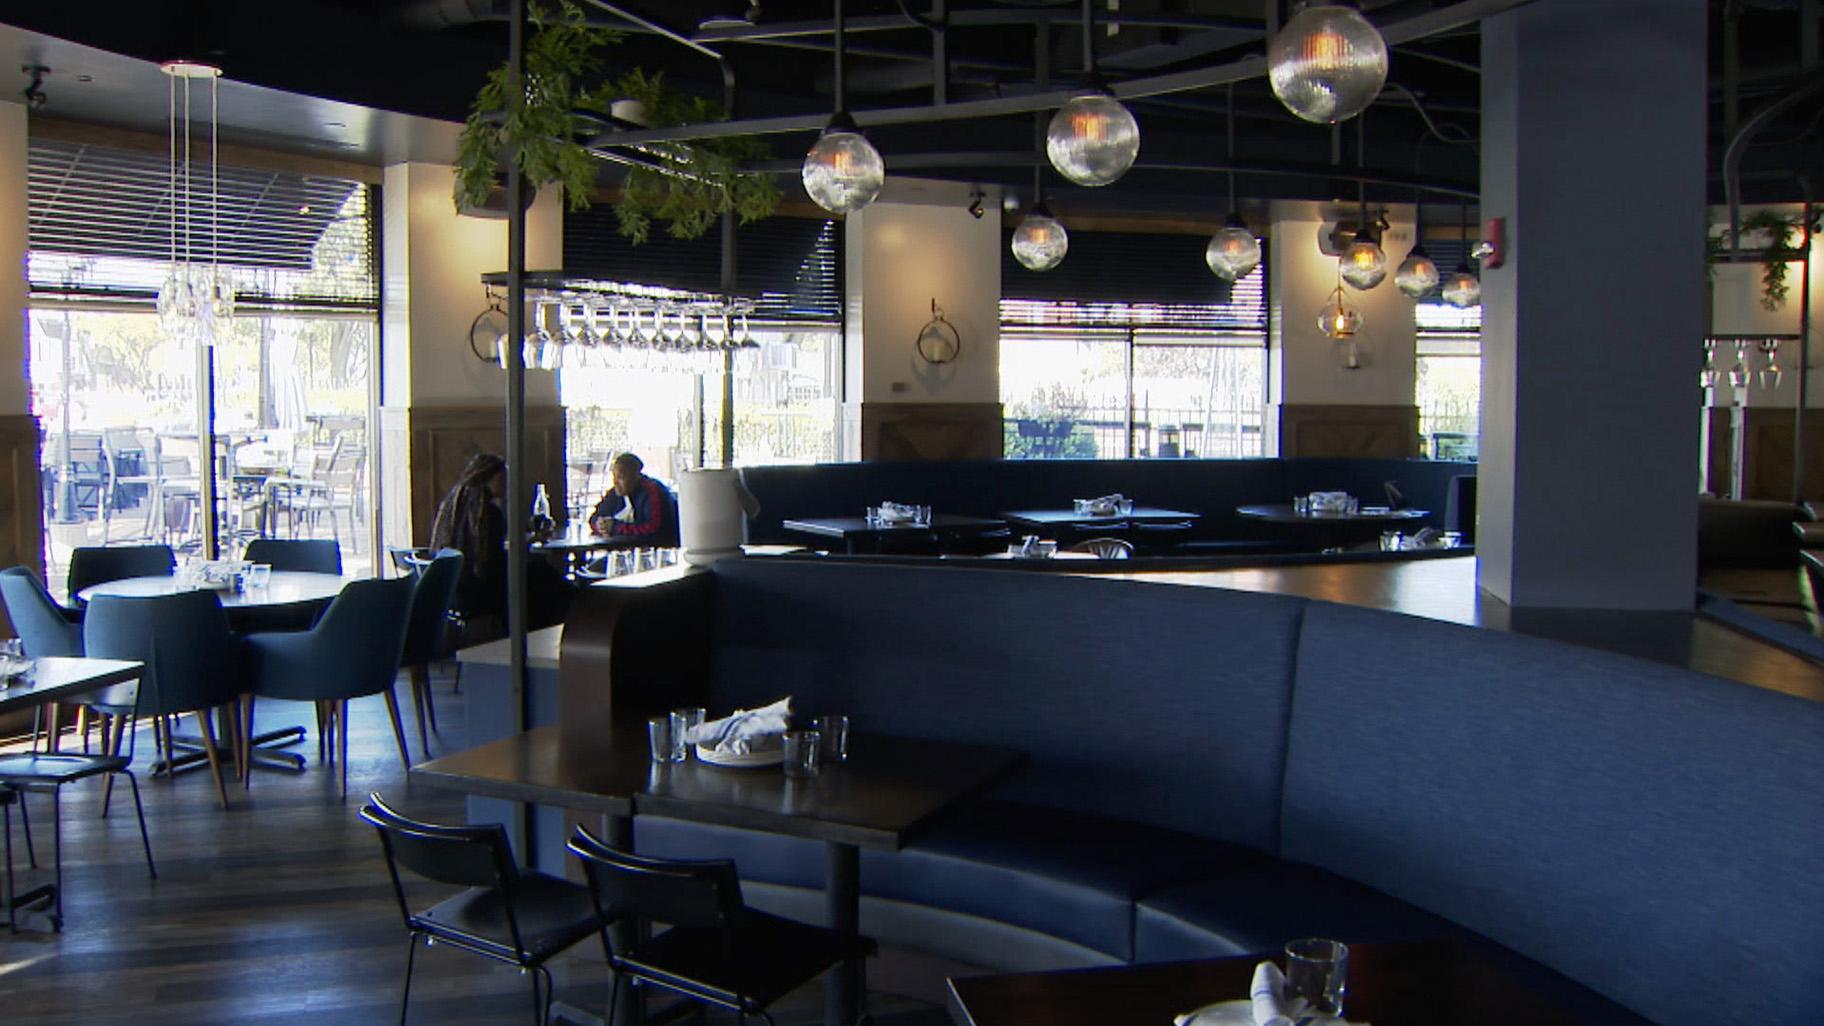 Passero, one of the many restaurants located in the downtown area, which offers a blend of American and Italian cuisine. (WTTW News)